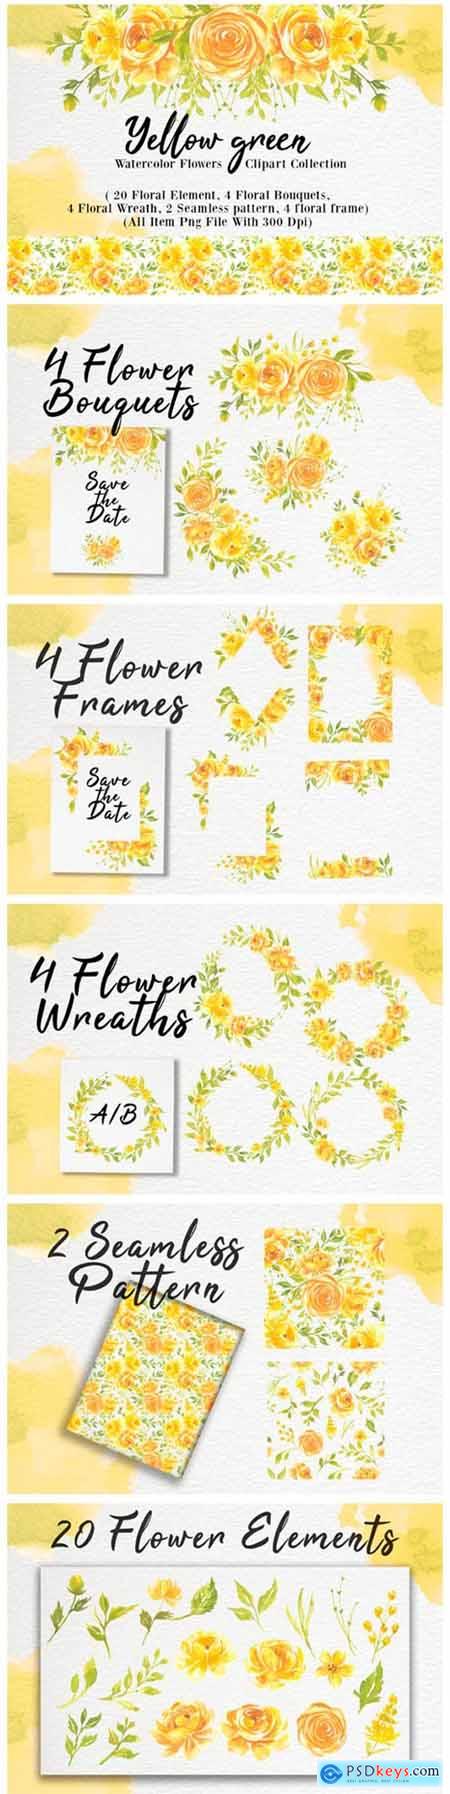 Yellow Flower Watercolor Clipart 1953225